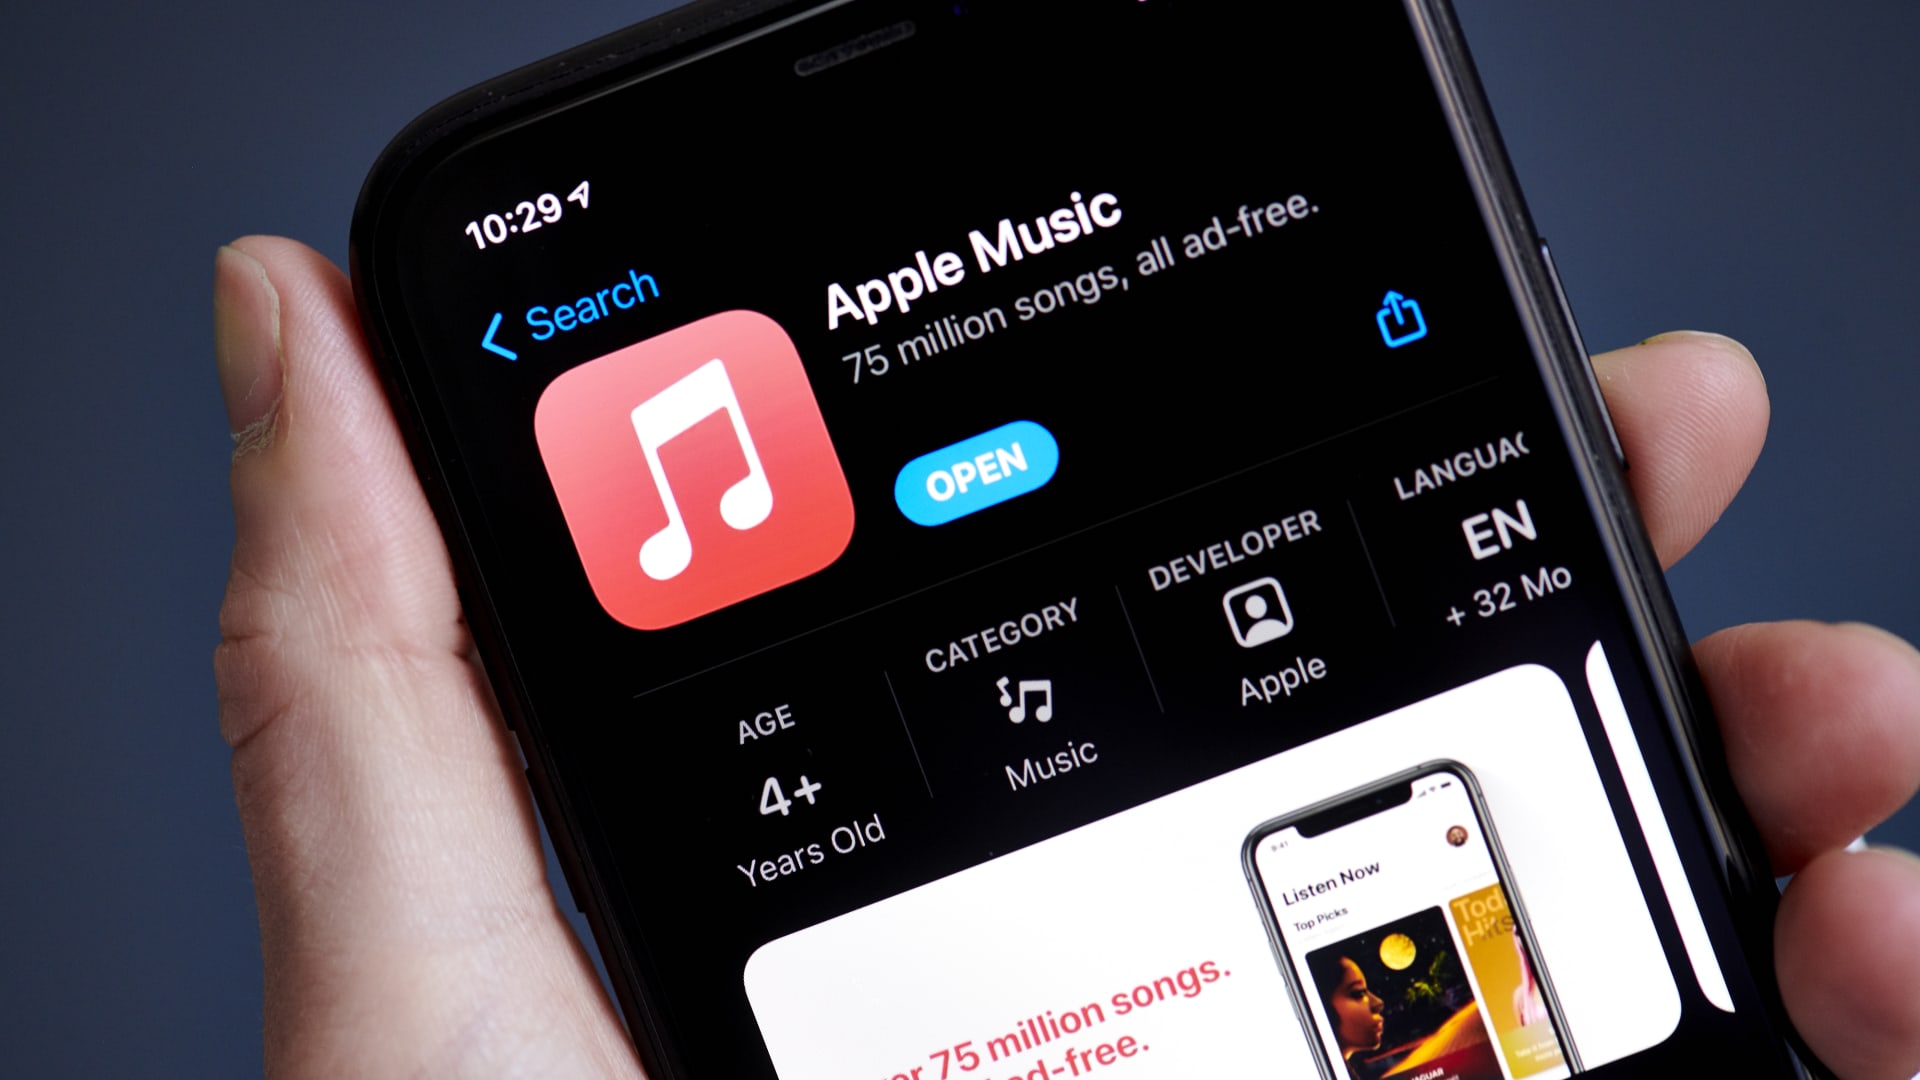 Apple says App Store is down along with music, podcasts